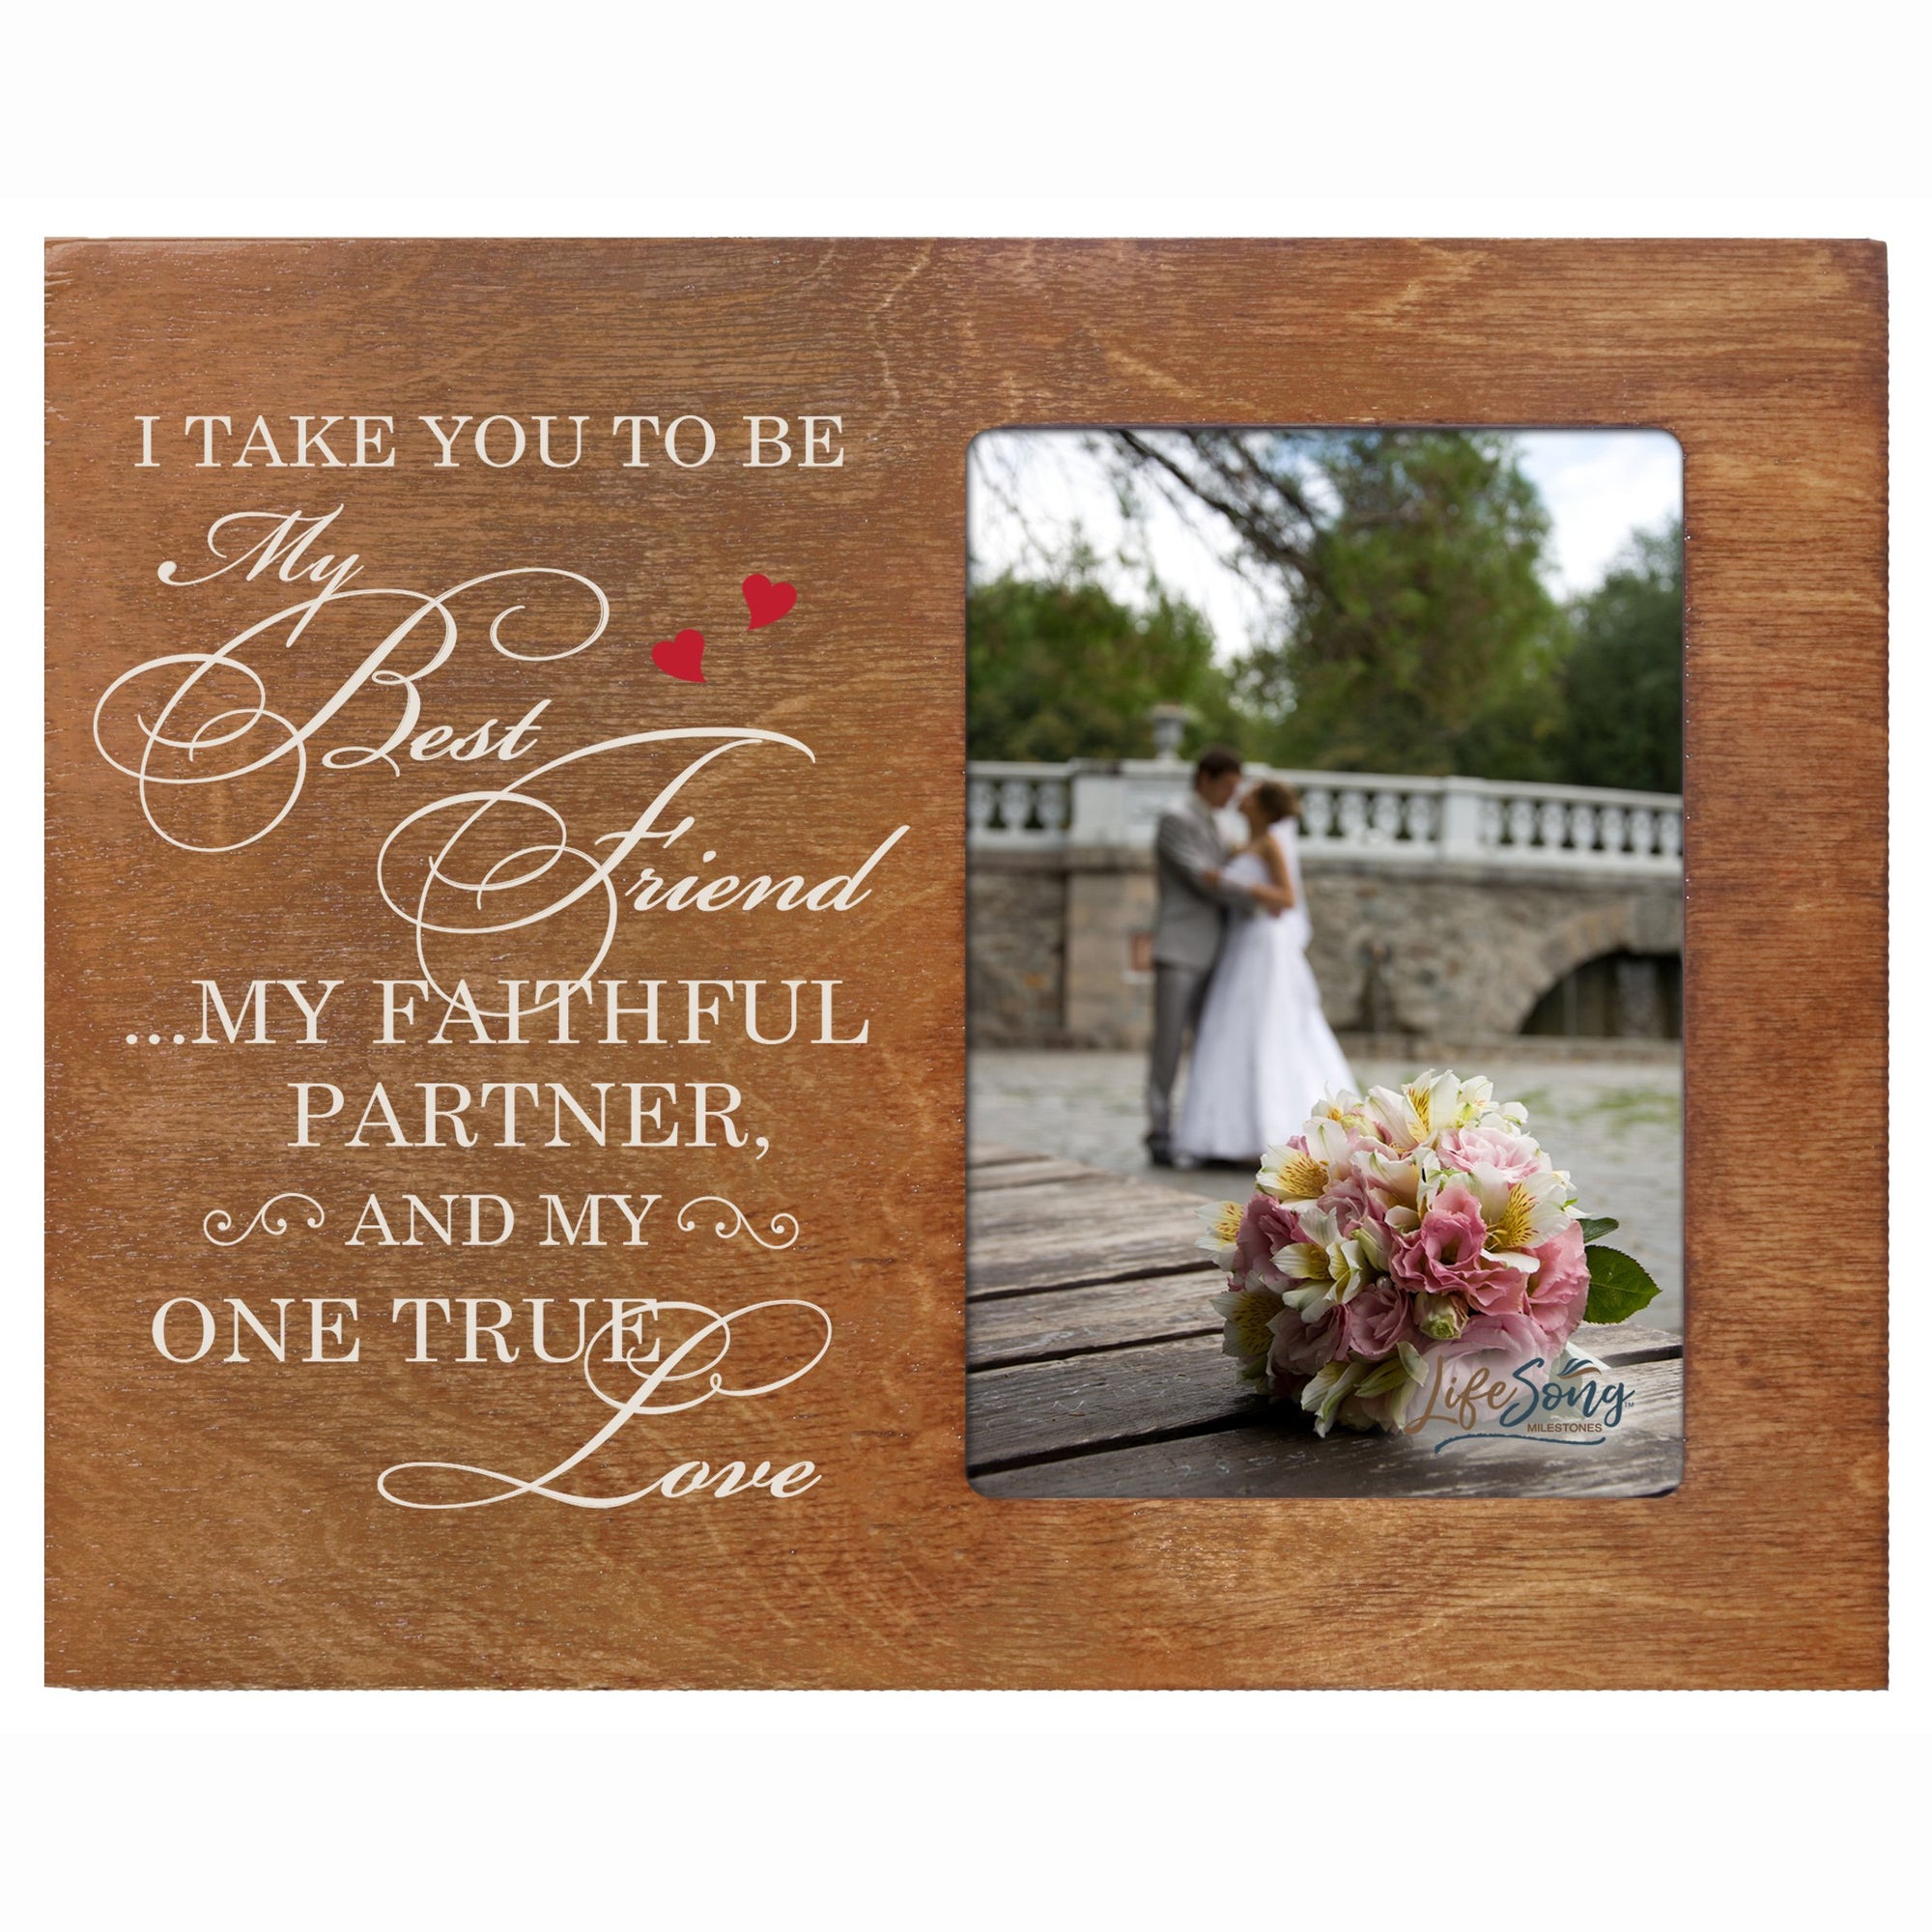 LifeSong Milestones Wedding Vow Digital With Hearts Anniversary Wooden 8"x 10" Picture Frame Engagement Gift for Couple, Best Friends, Newly Married Mr and Mrs. 4 x 6 Photo